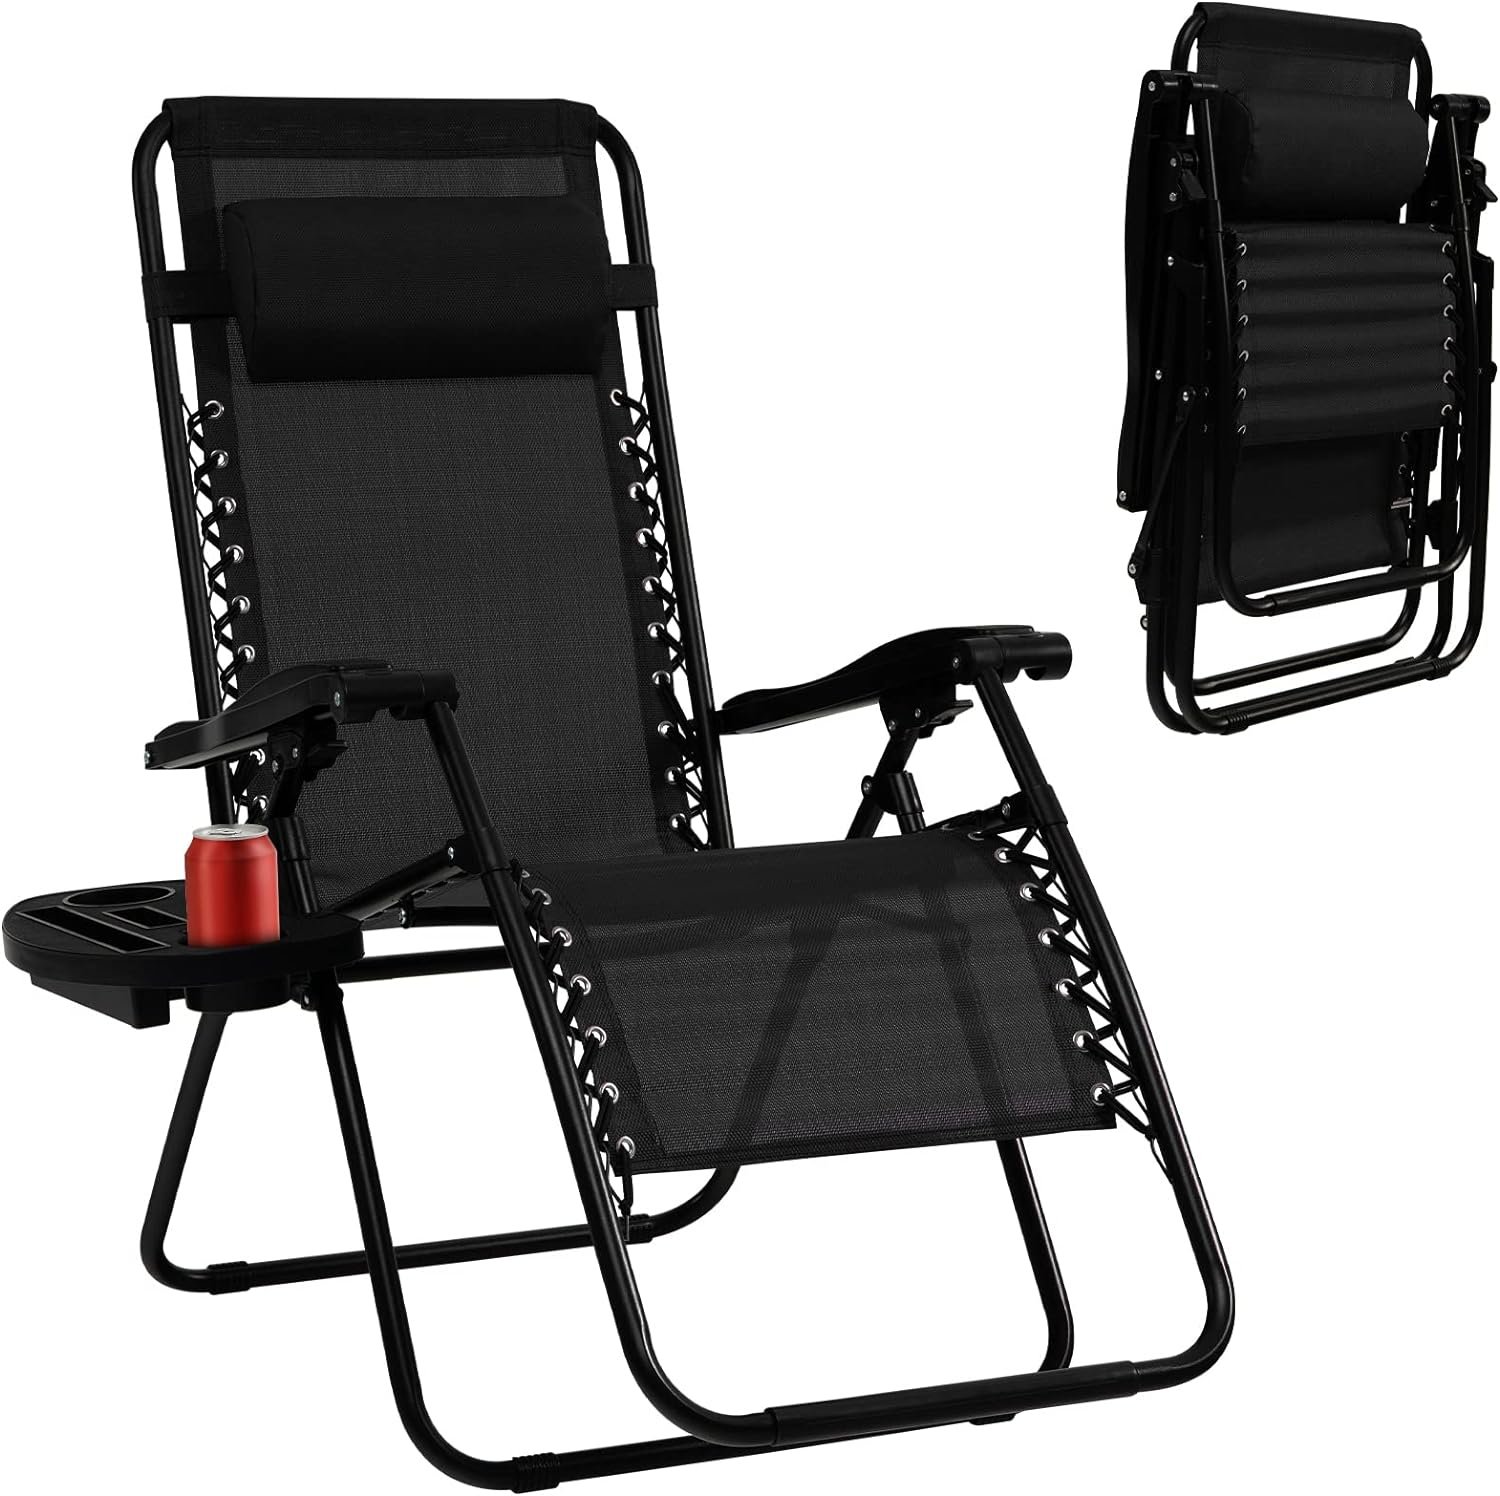 Tangkula Zero Gravity Chair, Folding Patio Lounge Chair Adjustable Outdoor Recliner with Cup Holder, Wide Armrest for Patio Garden Poolside Outdoor Yard Beach, Support 350 lbs (1, Black)